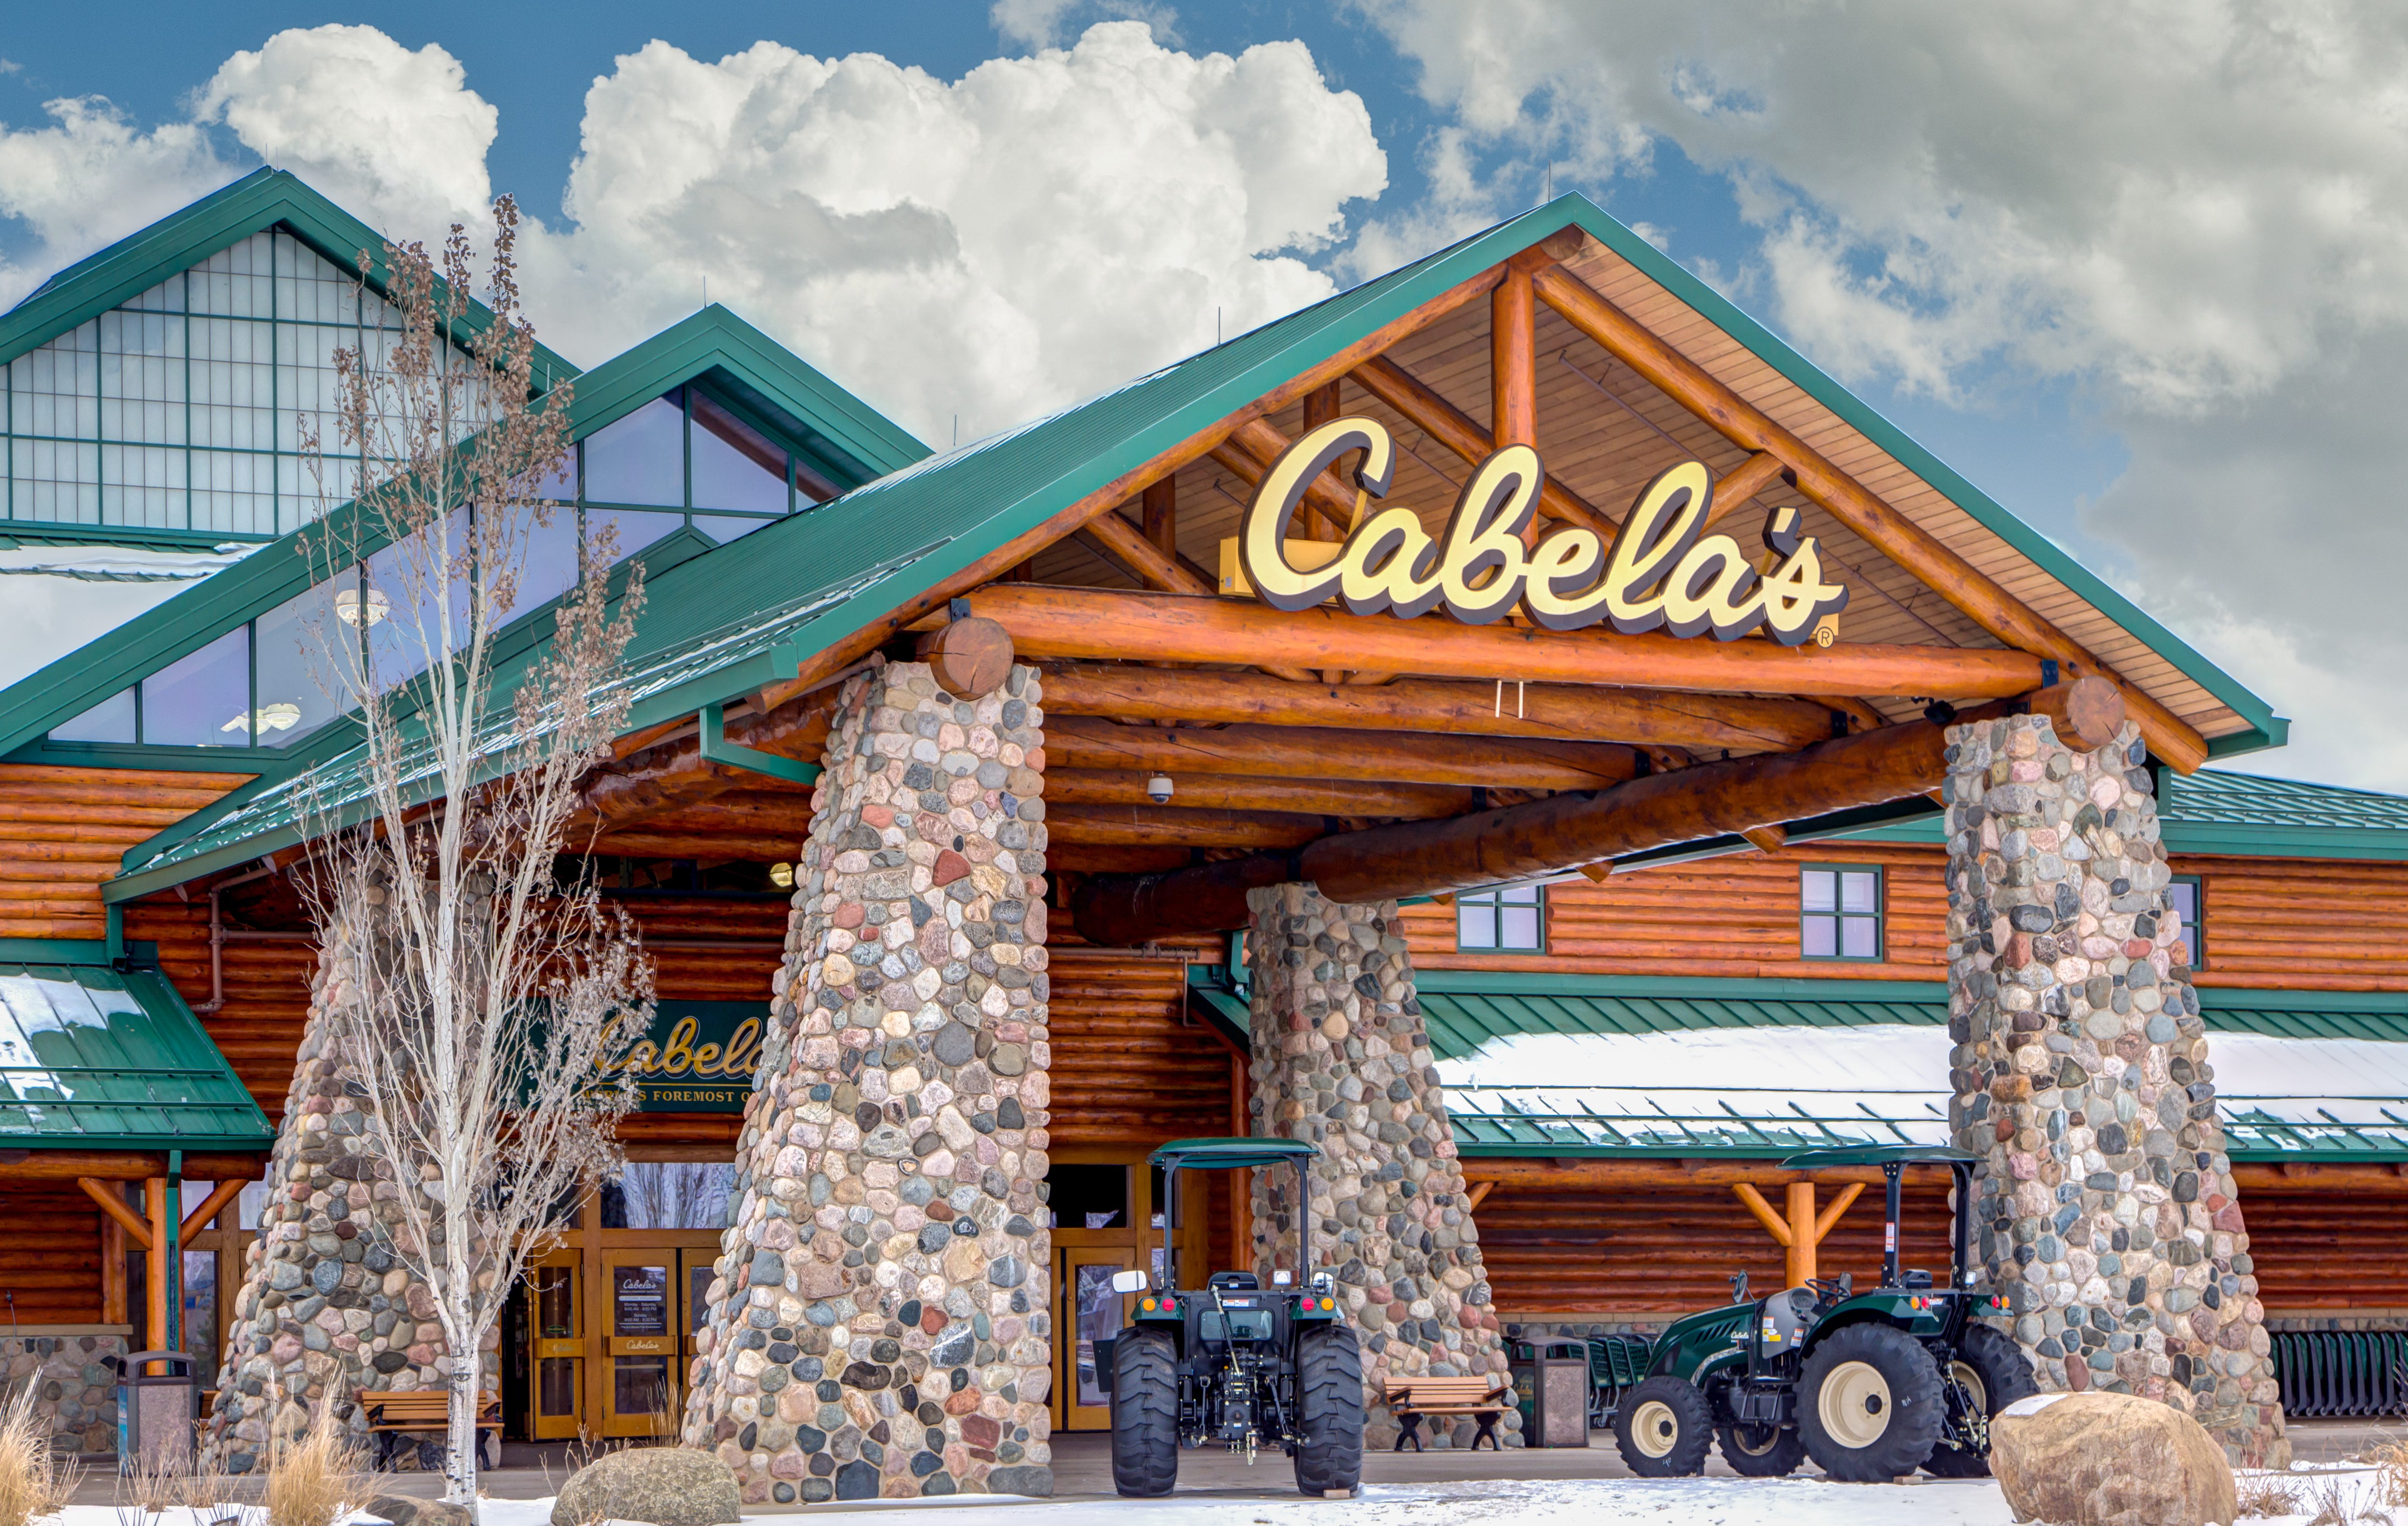 Cabela’s Has “Rolled Up the Mat” for RV Parking According to Popular Camping App